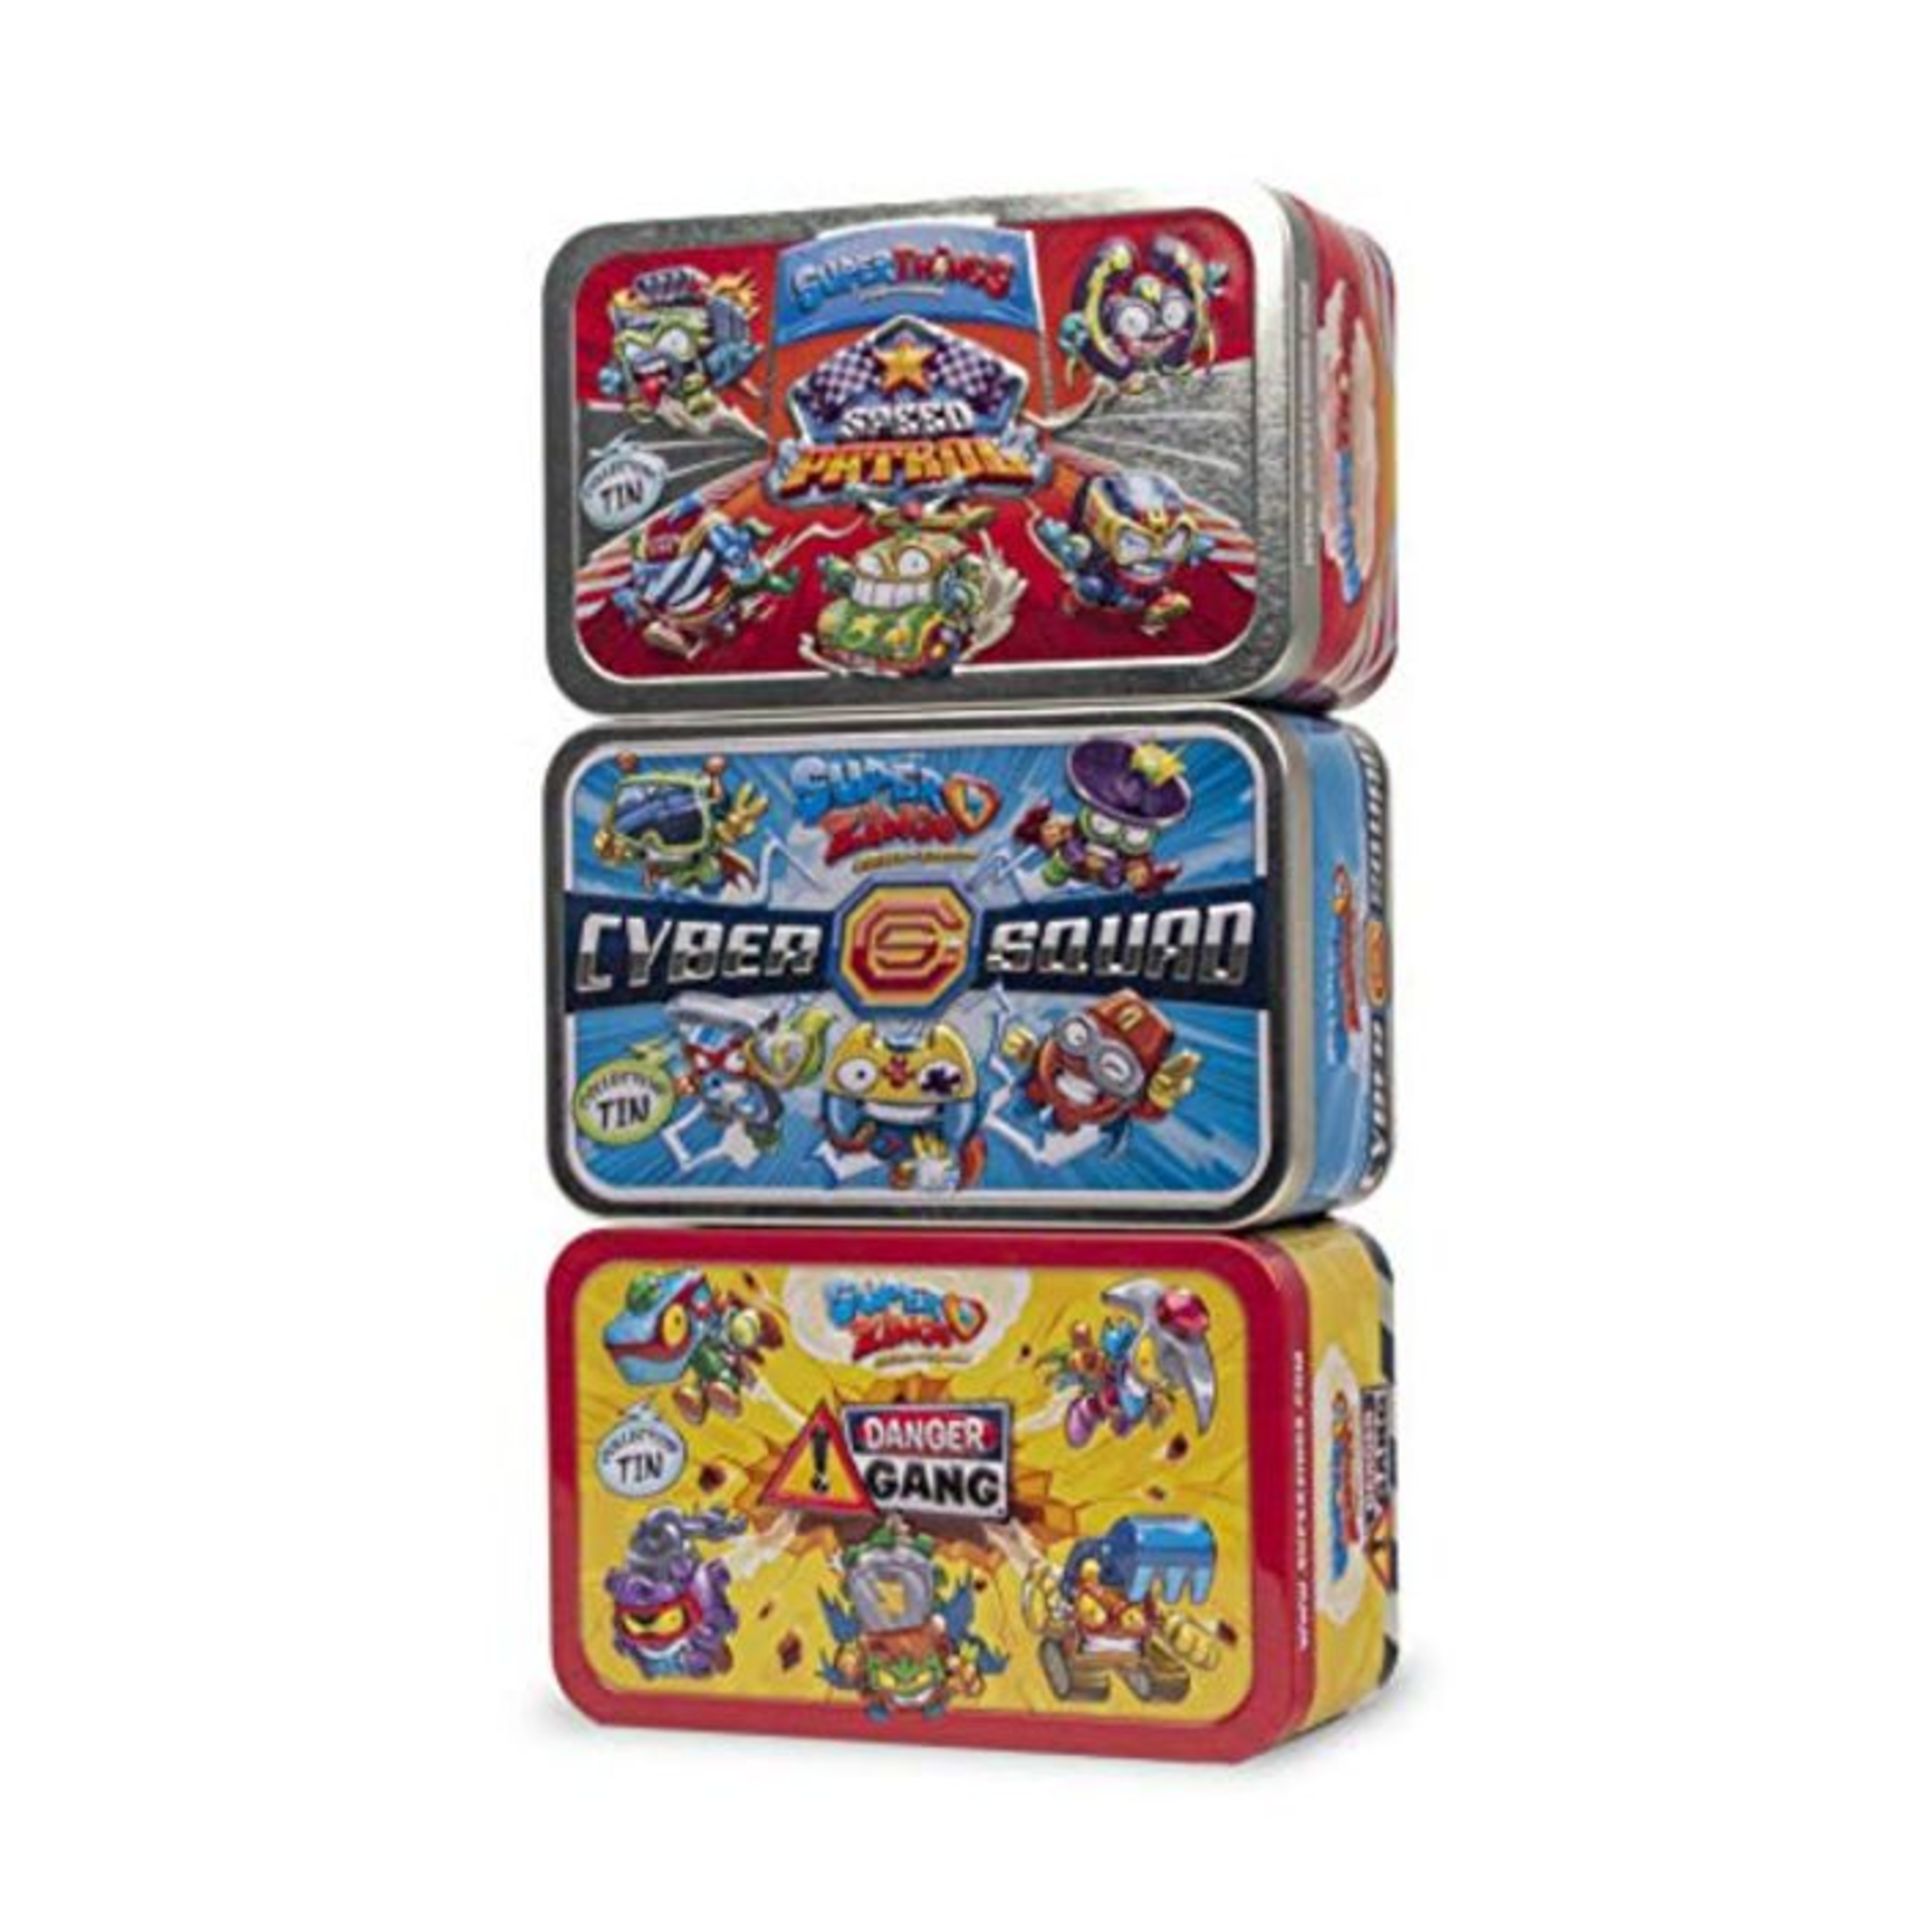 SuperThings Rivals of Kaboom - Secret Spies - Pack of 3 Cans (PSZSV123IN00) with 5 Fig